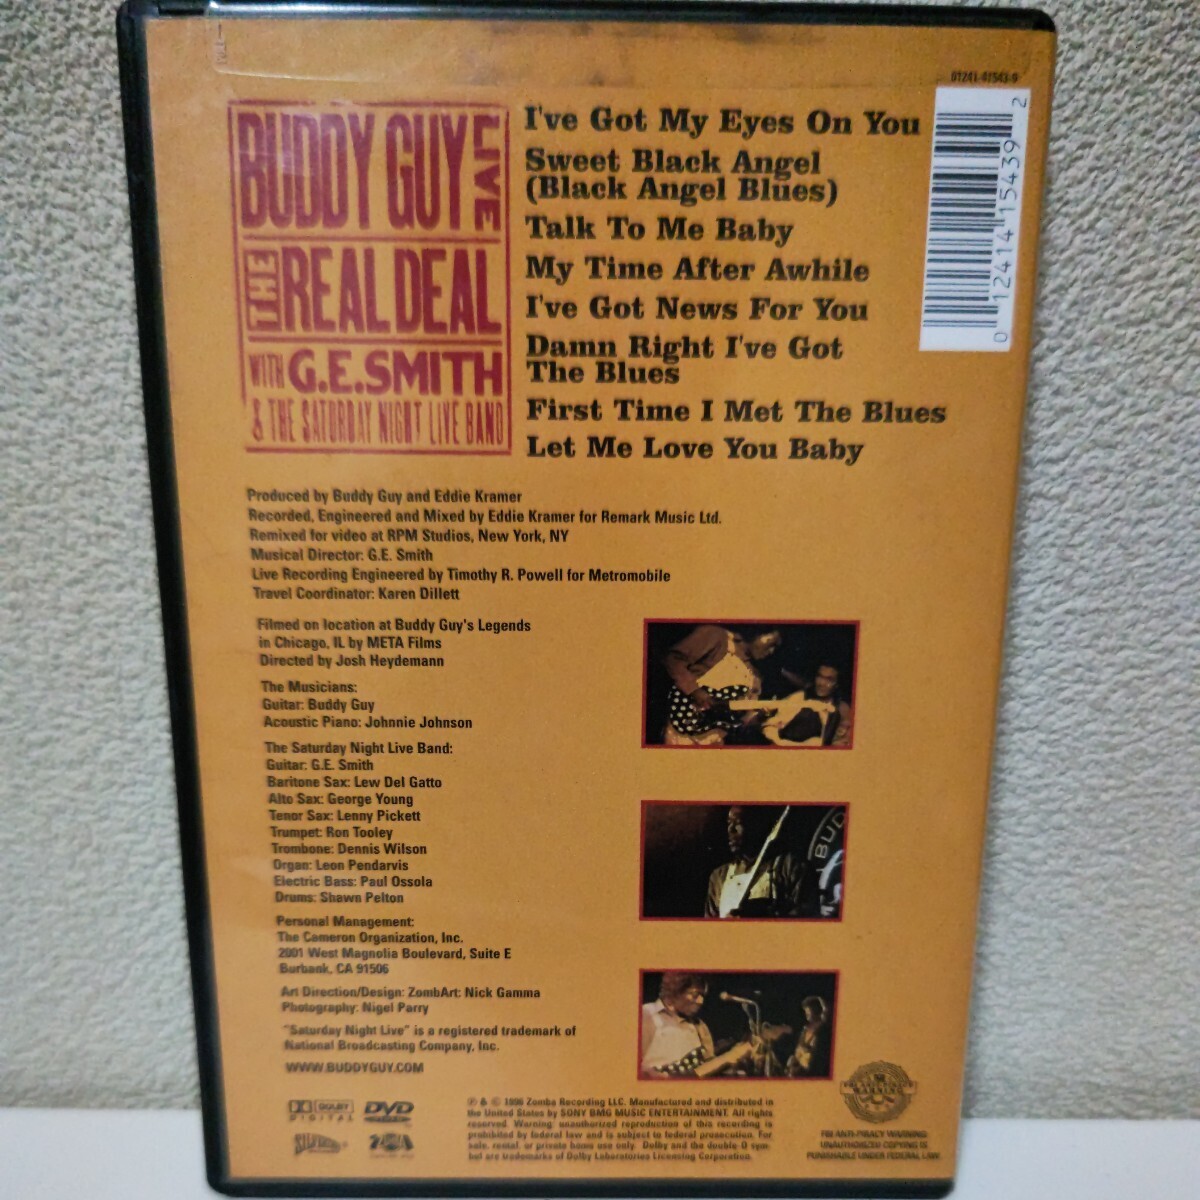 BUDDY GUY/Live! The Real Deal foreign record DVDbati*gai